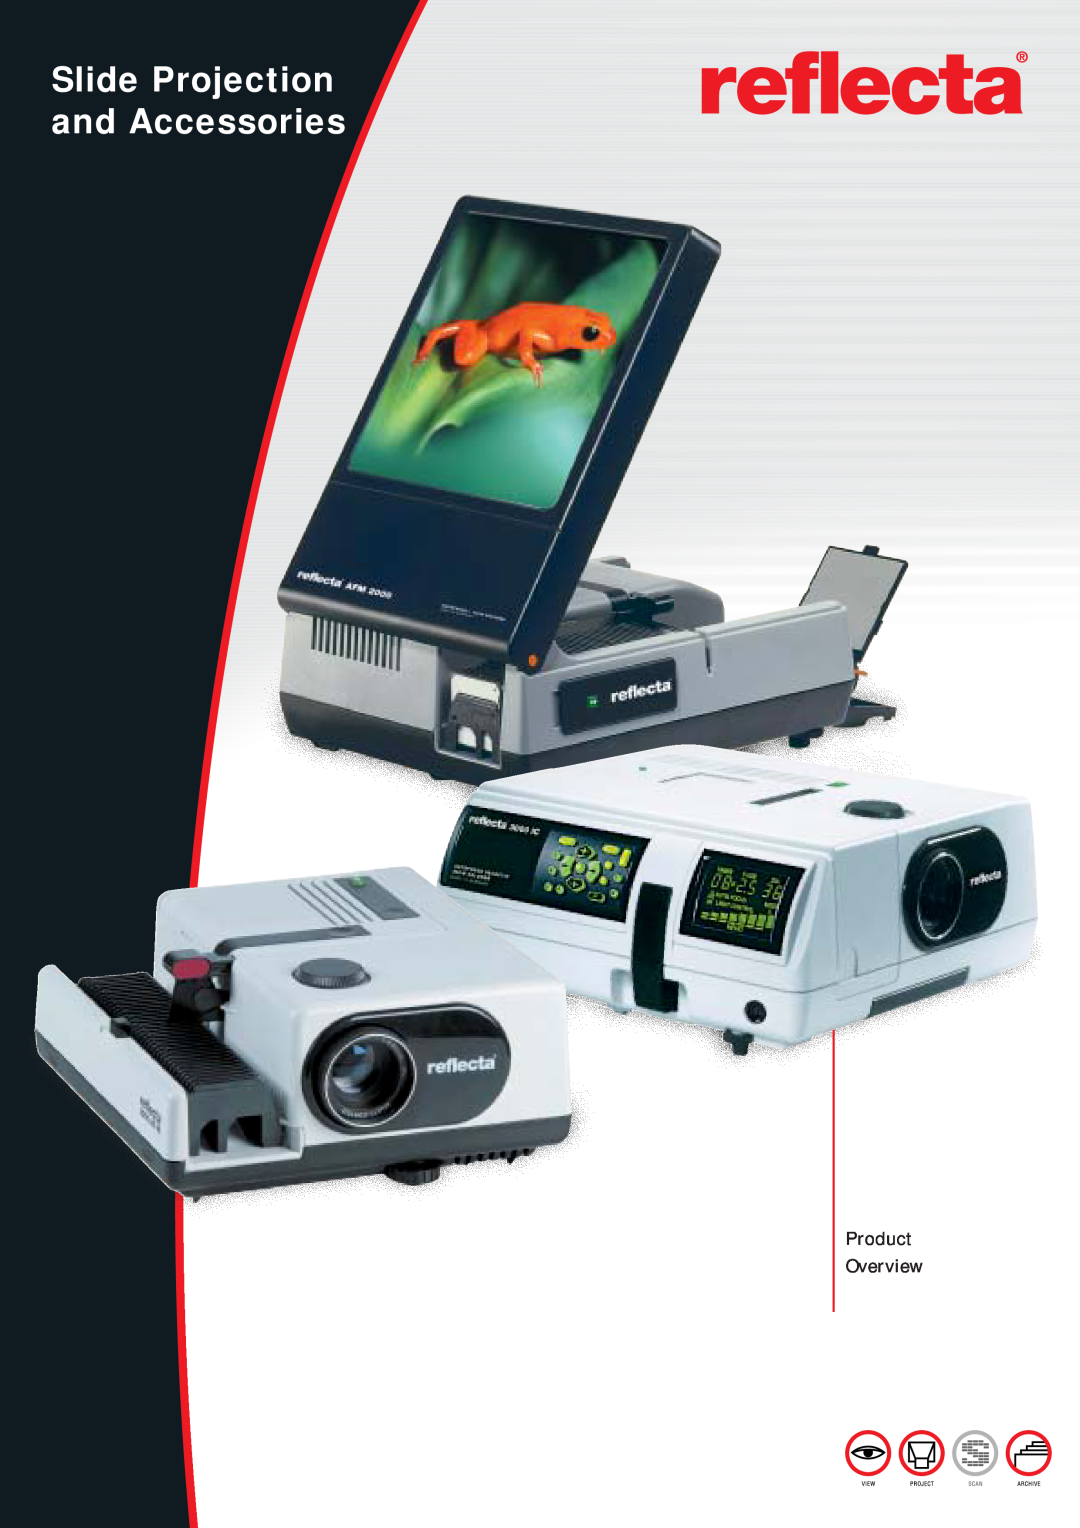 Reflecta SERIES 2500AFM, SERIES 3000, SERIES 2000 manual Slide Projection and Accessories, Product Overview 